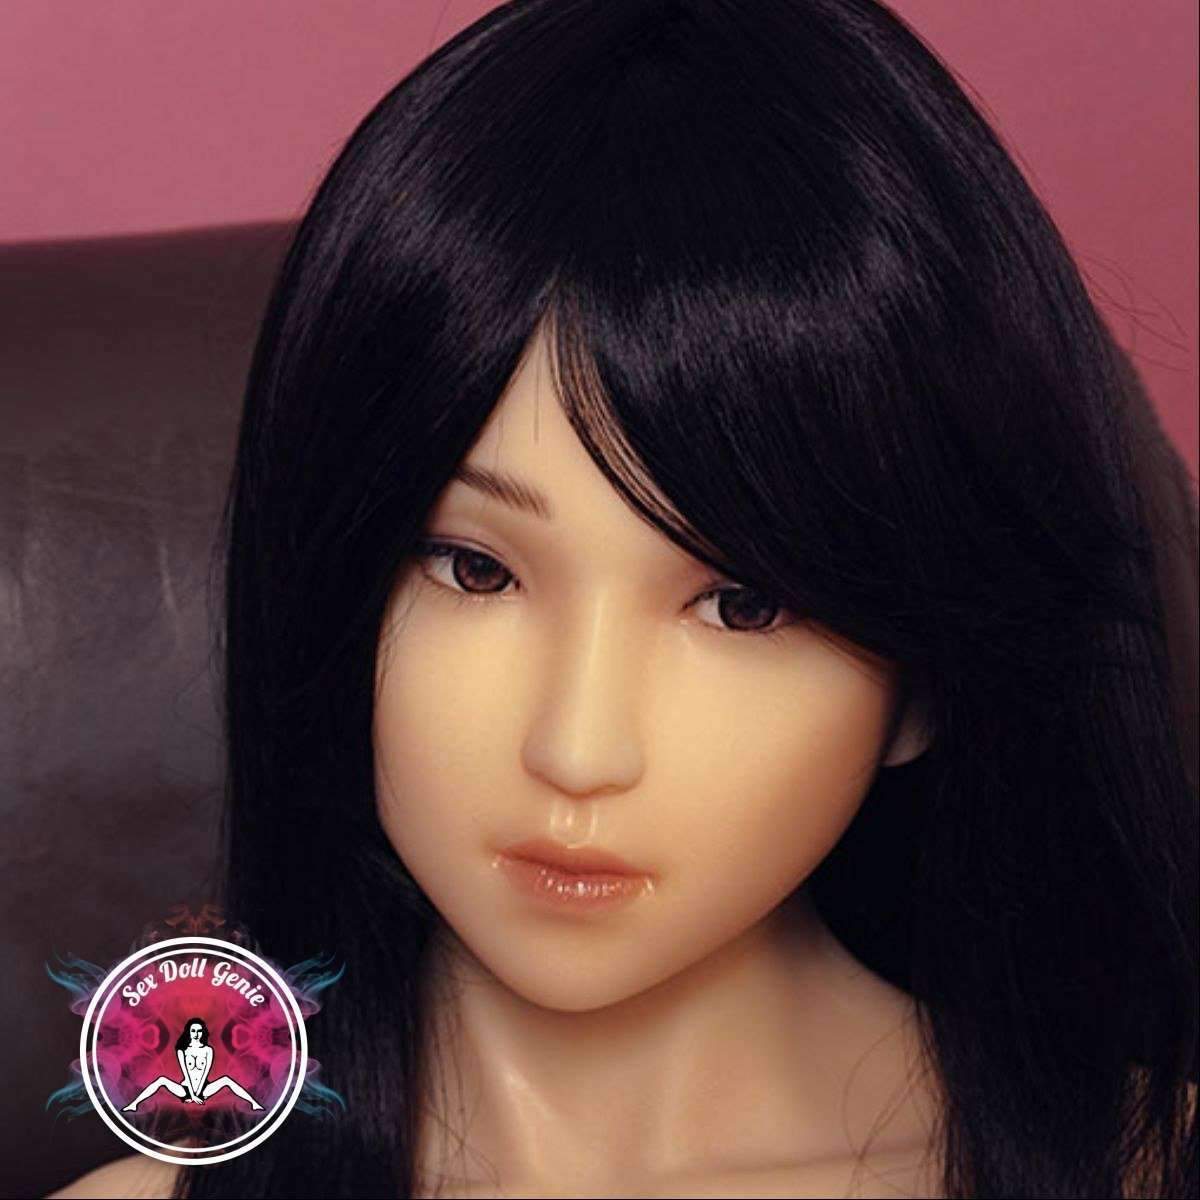 DS Doll - 163 - Emily Head - Type 1 D Cup Silicone Doll-3